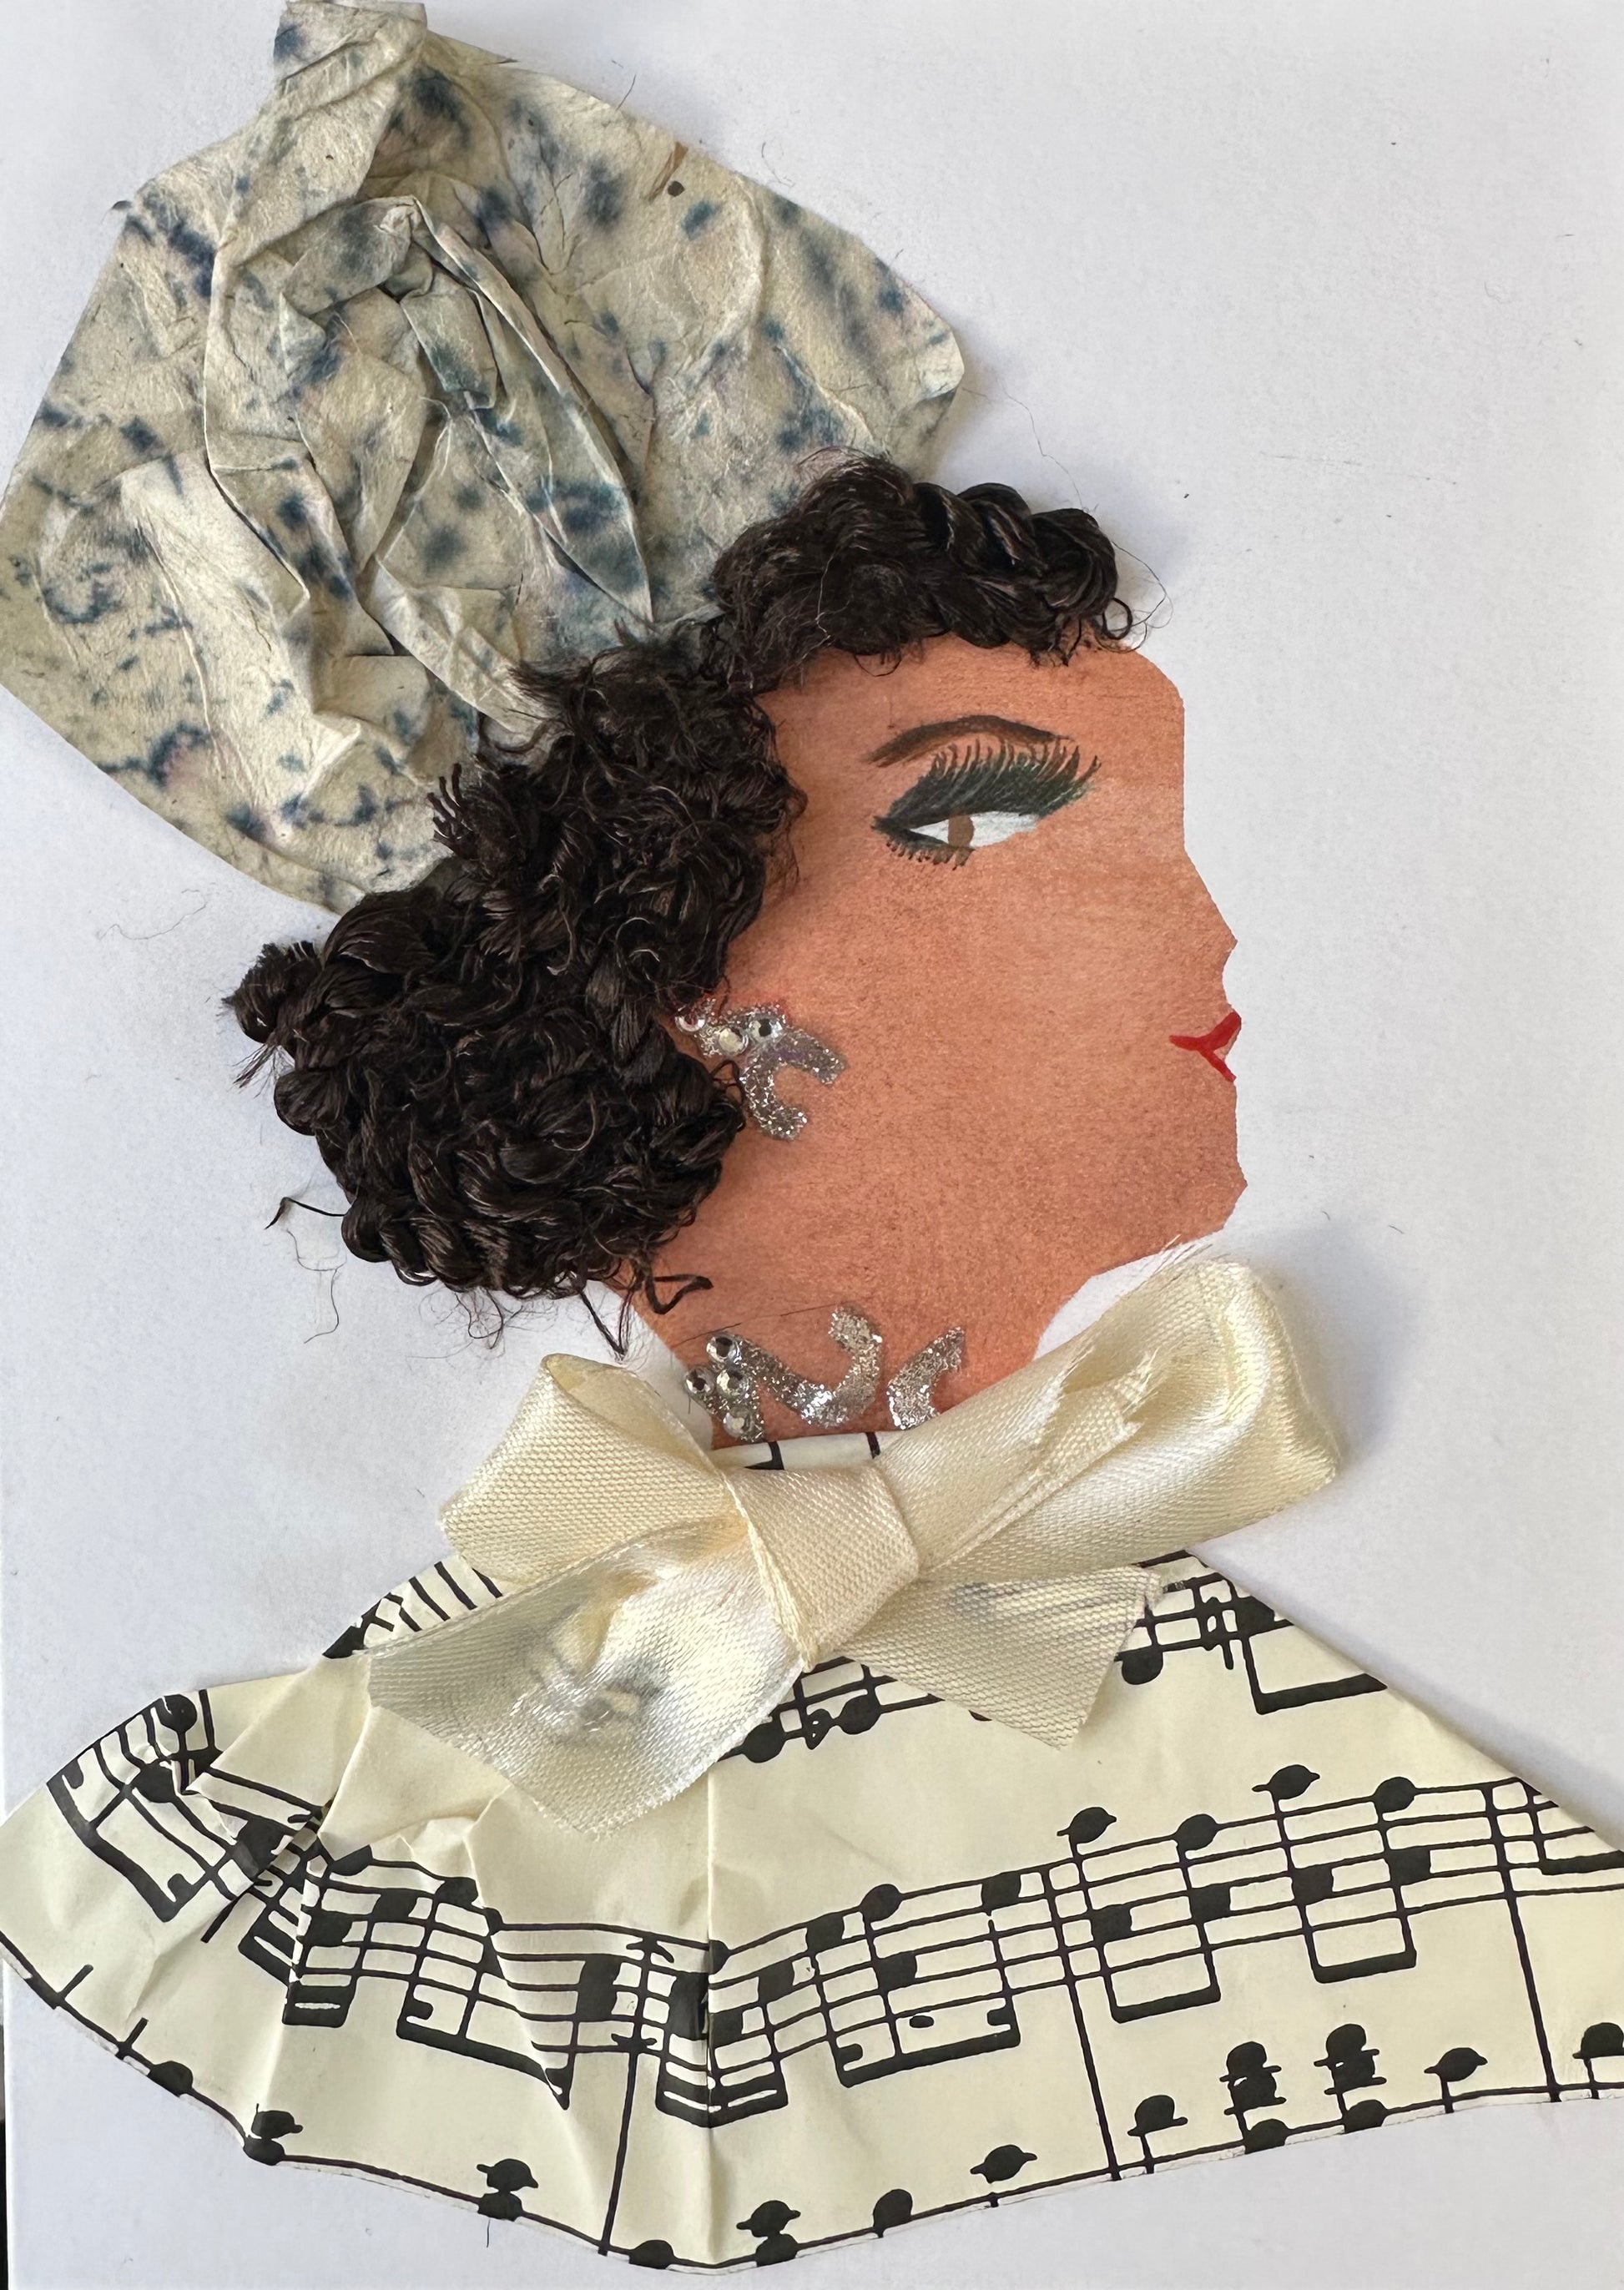 I designed this handmade card of a woman dressed in a white blouse with music notes. Her collar is wrapped with a white bow, and her hatinator is white and gray. Khloe's jewllery is made up of silver gemstones.